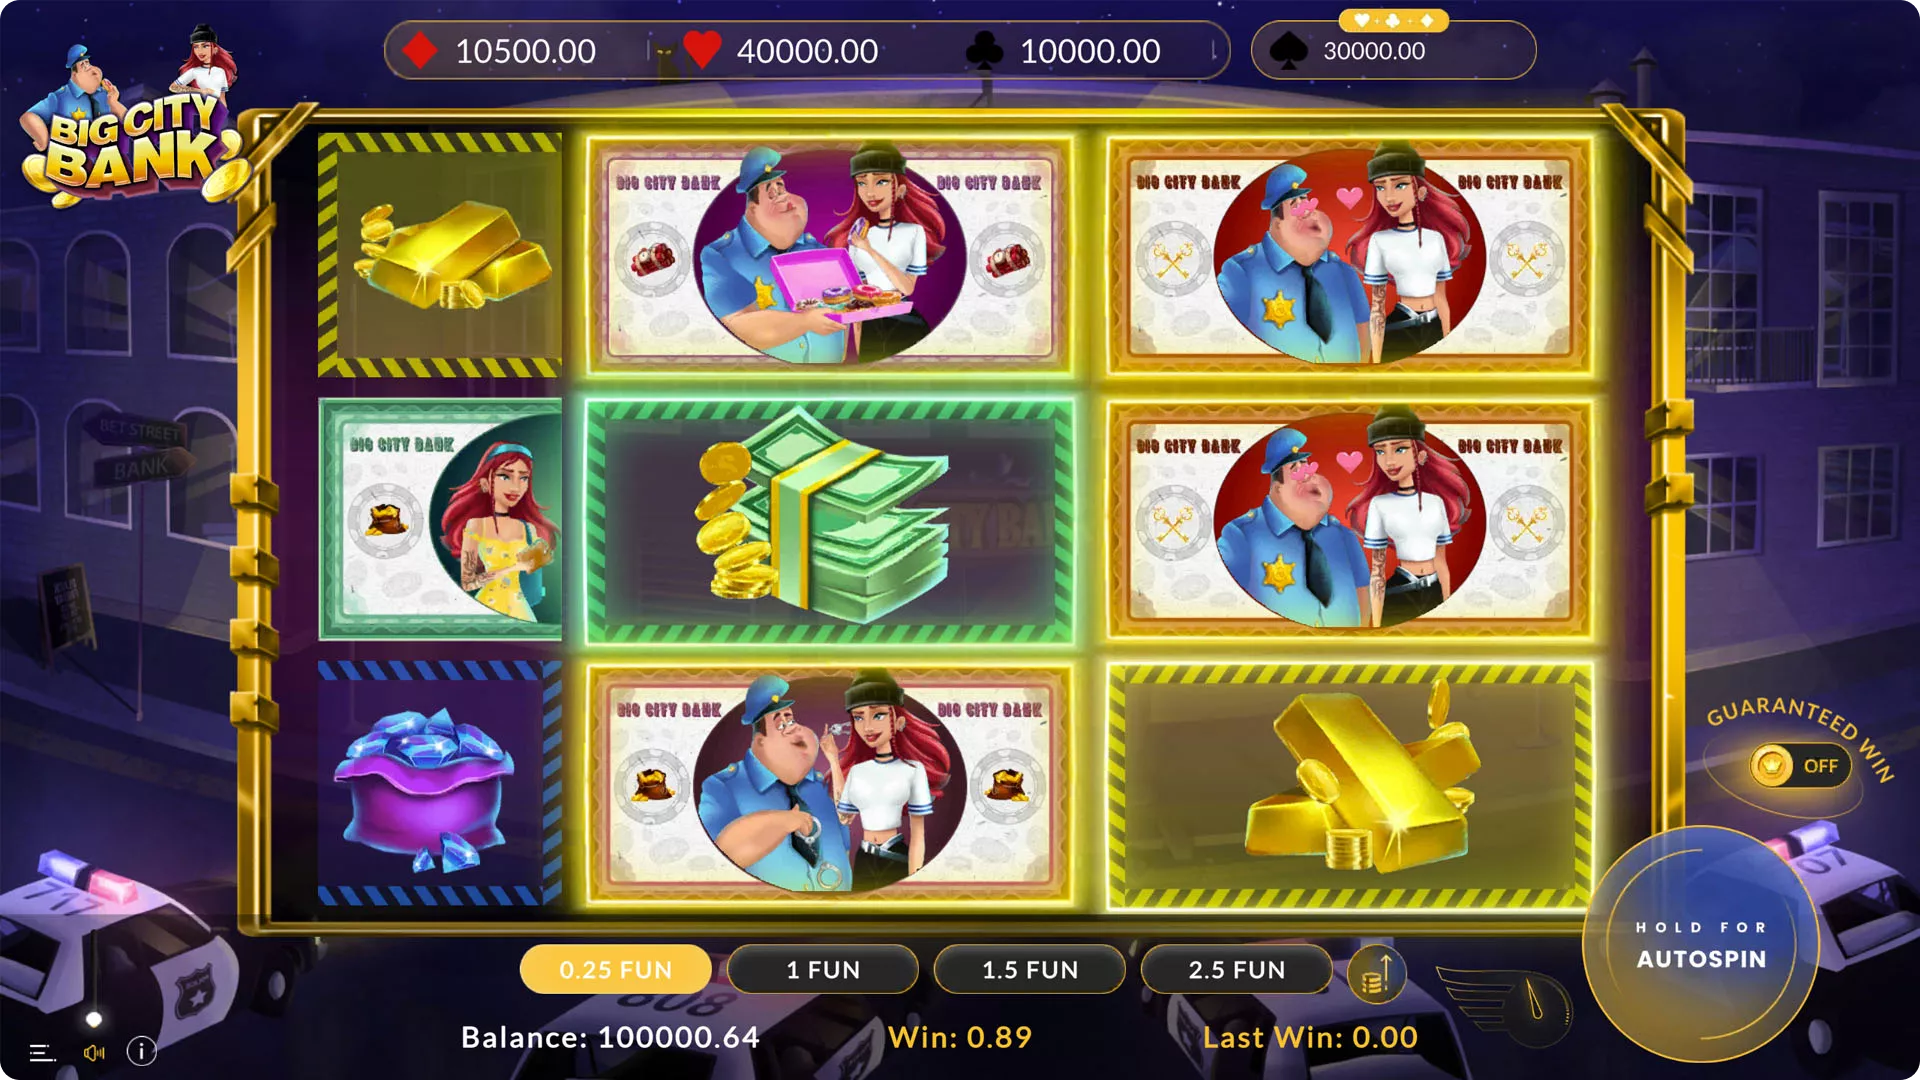 The Interface of Big City Bank Game